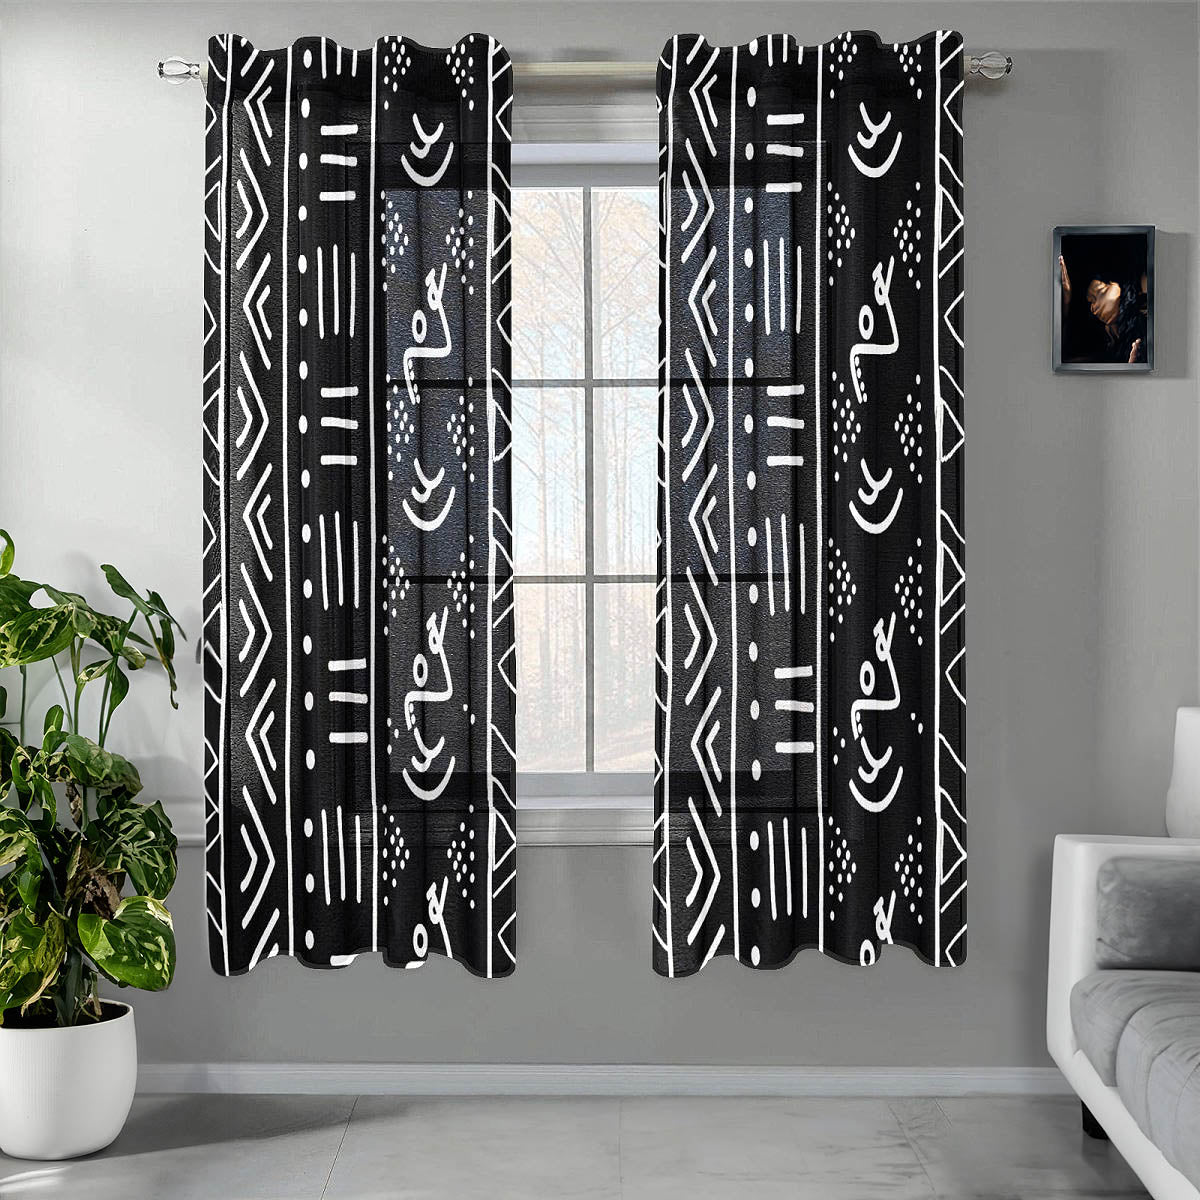 Black with White African Curtain Bogolan Ethnic Print